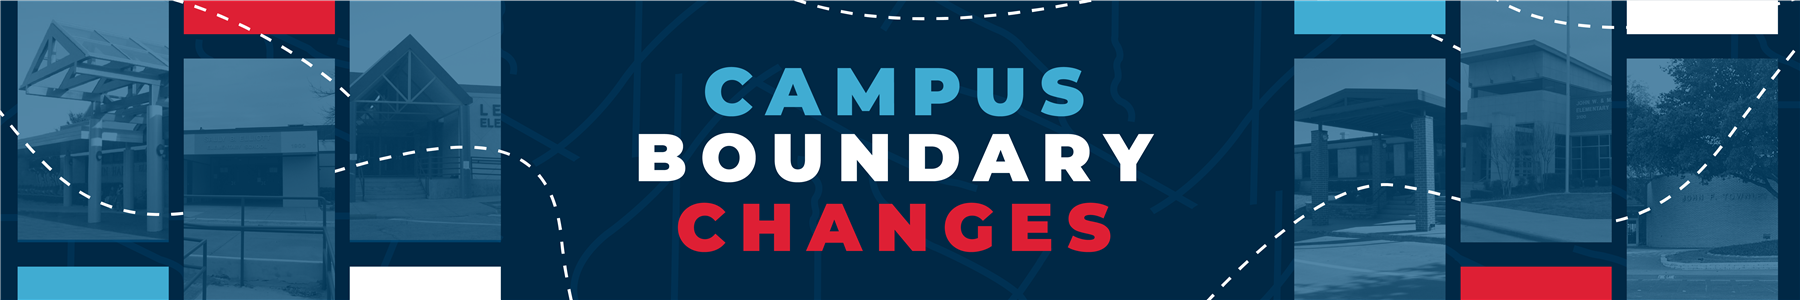 Campus Boundary Changes